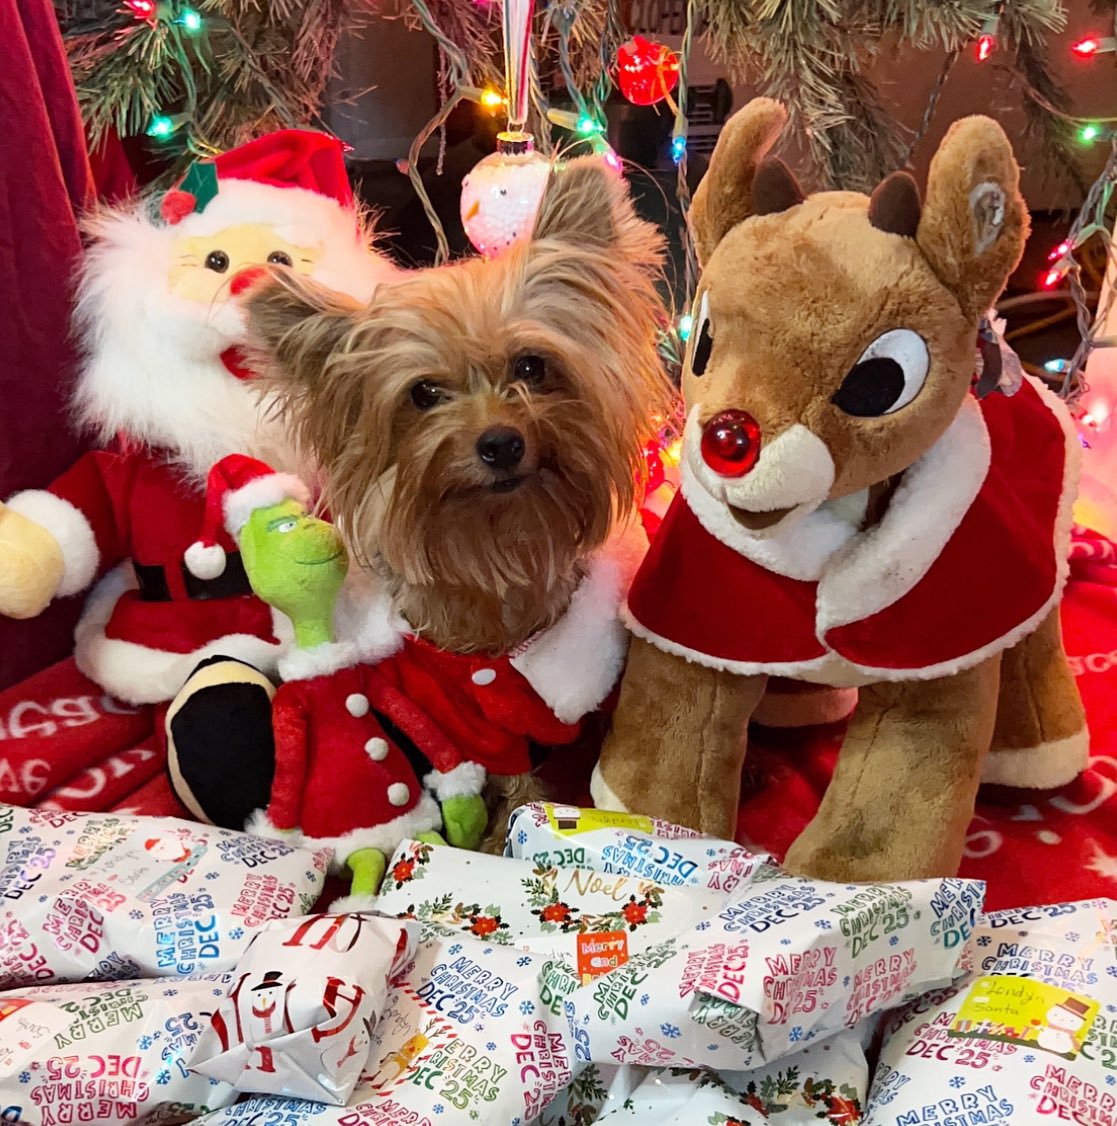 Happy Christmas Eve 🎄 What are your favorite Christmas traditions? #ChristmasEve #HappyChristmasEve #MerryChristmas #MerryChristmas2023 #cute #Christmas #love #DogsOfTwitter #DogsOnTwitter #dogsarefamily #Christmaspresent